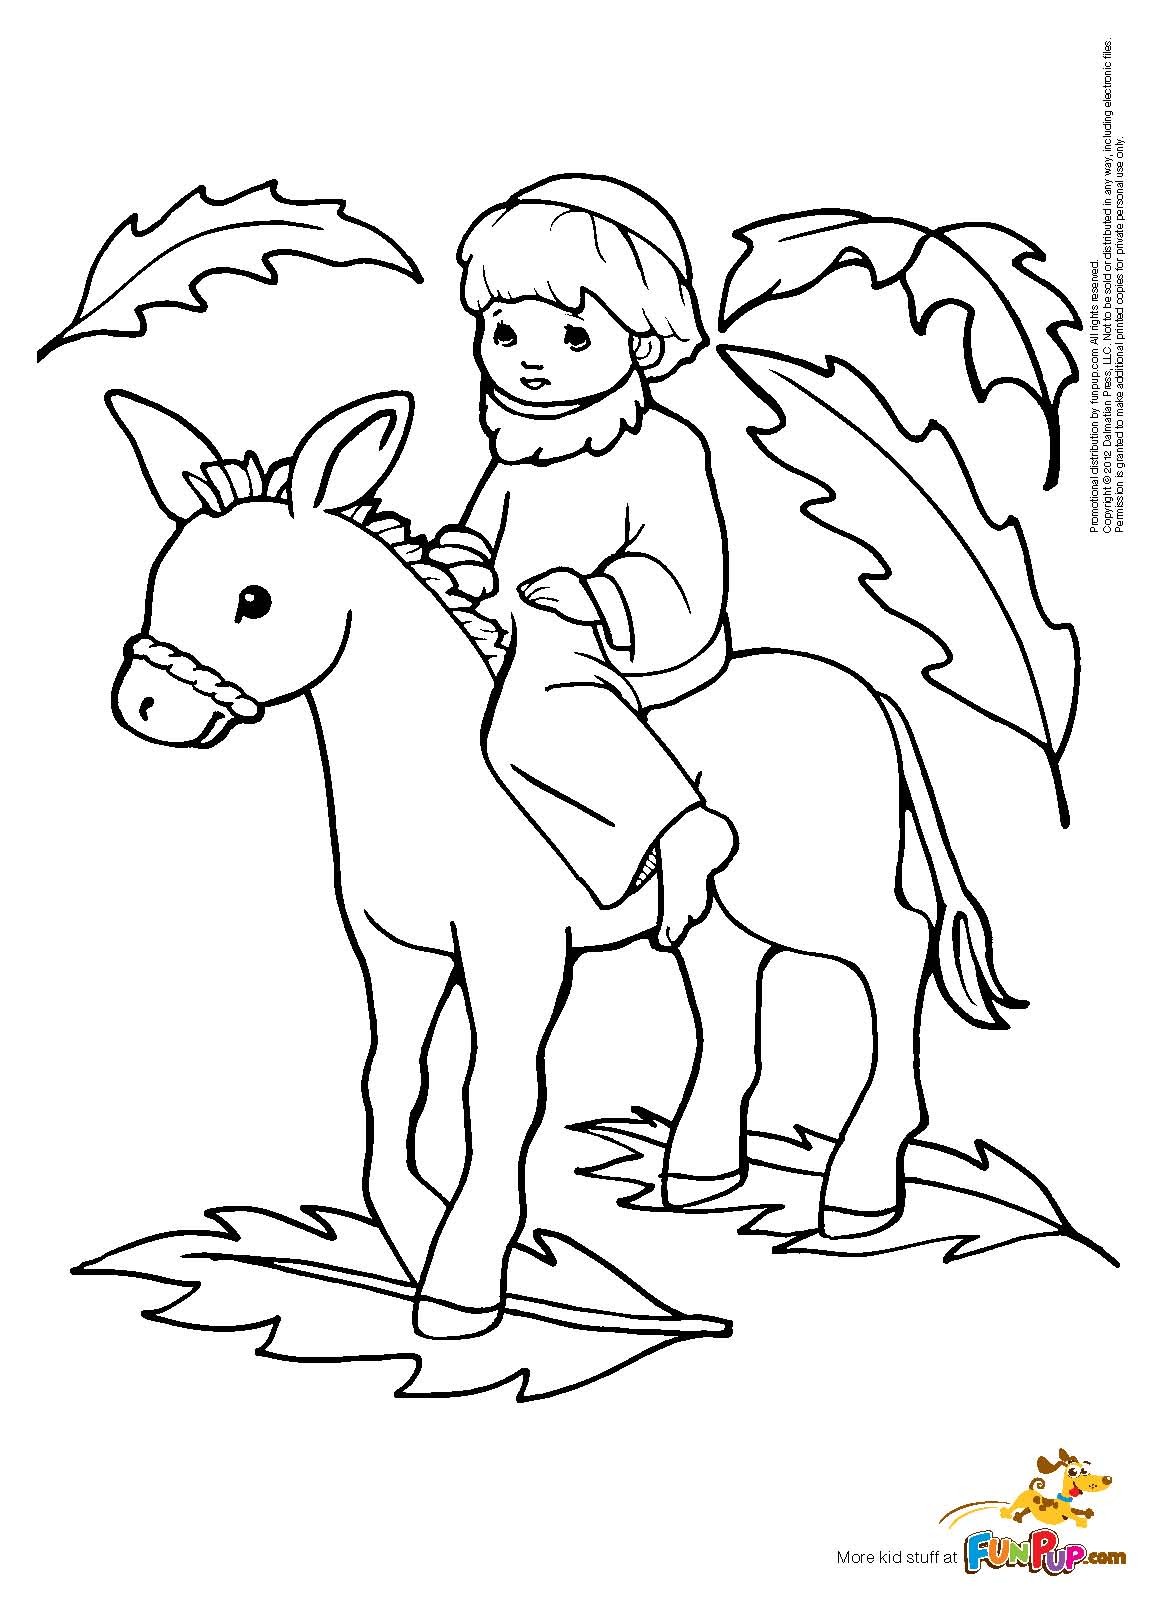 palm sunday coloring pages religious creation - photo #42